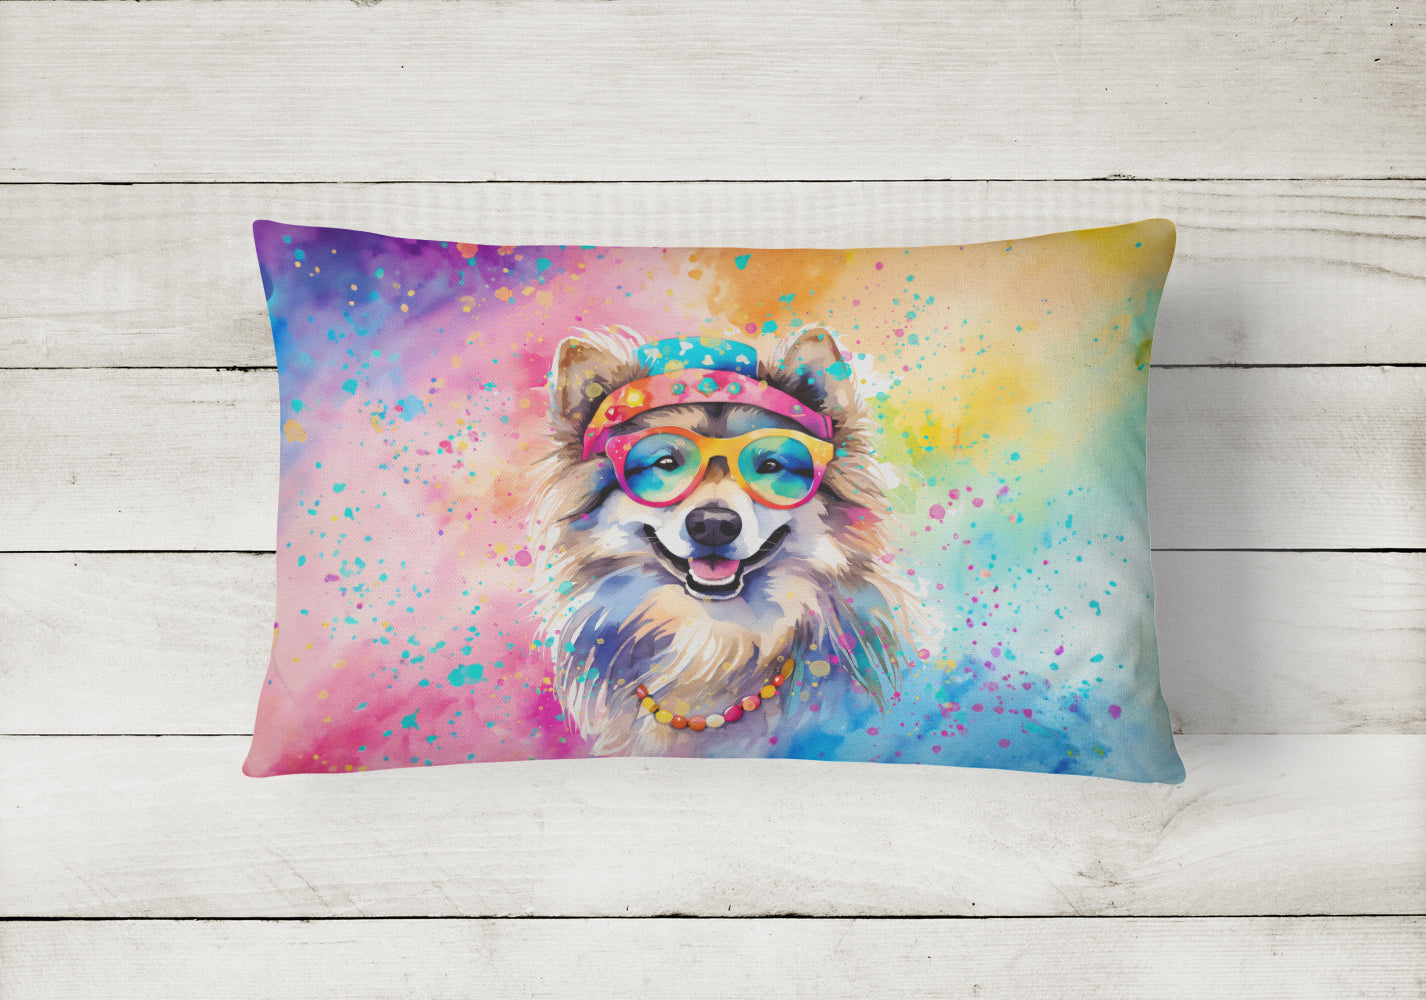 Buy this Keeshond Hippie Dawg Fabric Decorative Pillow